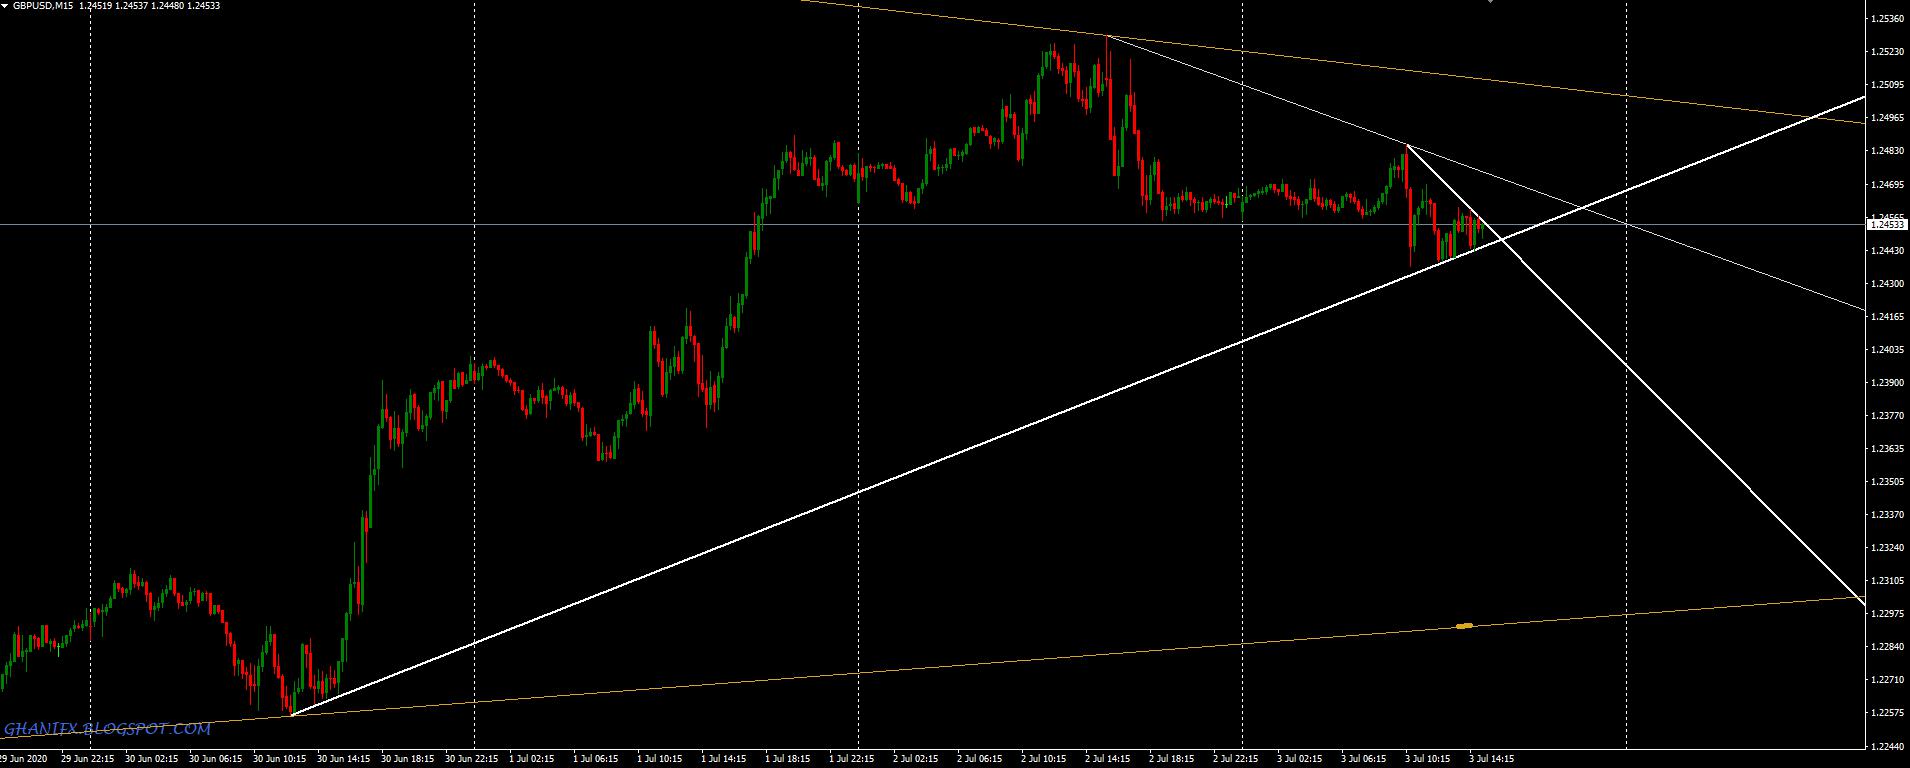 GhaniFx_Auto Trend Lines